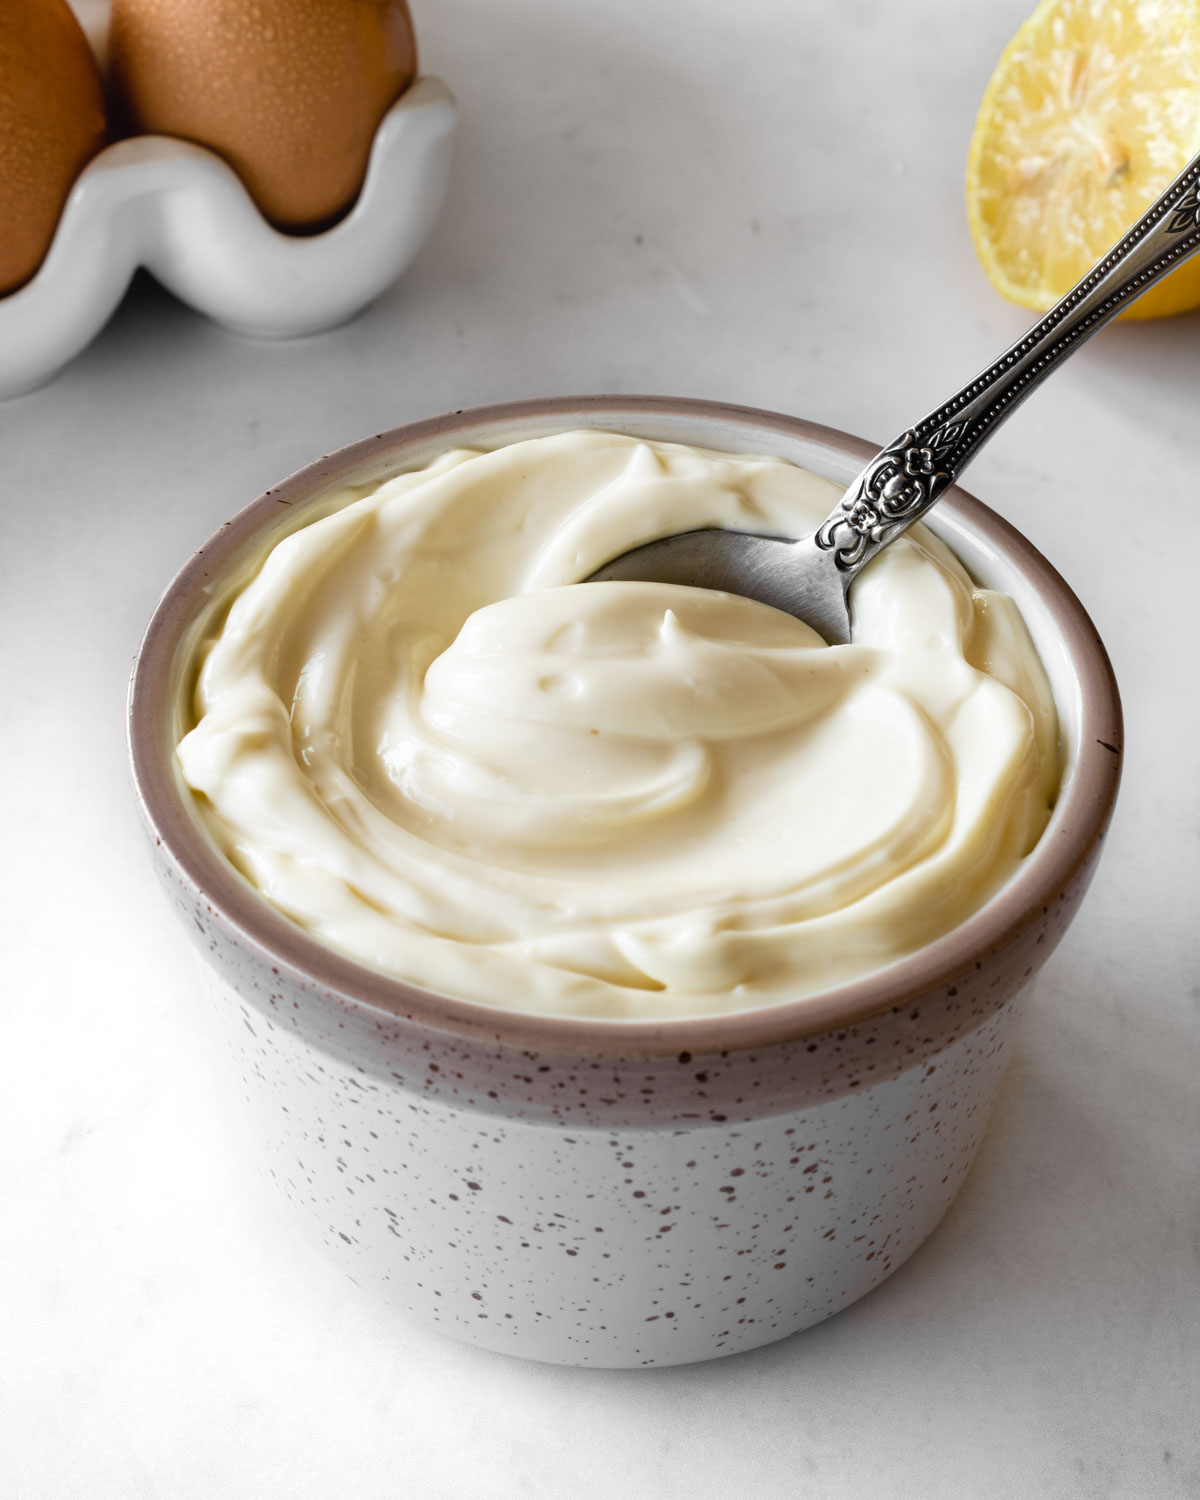 homemade mayonnaise in a small ceramic bowl with a spoon scooping some out.